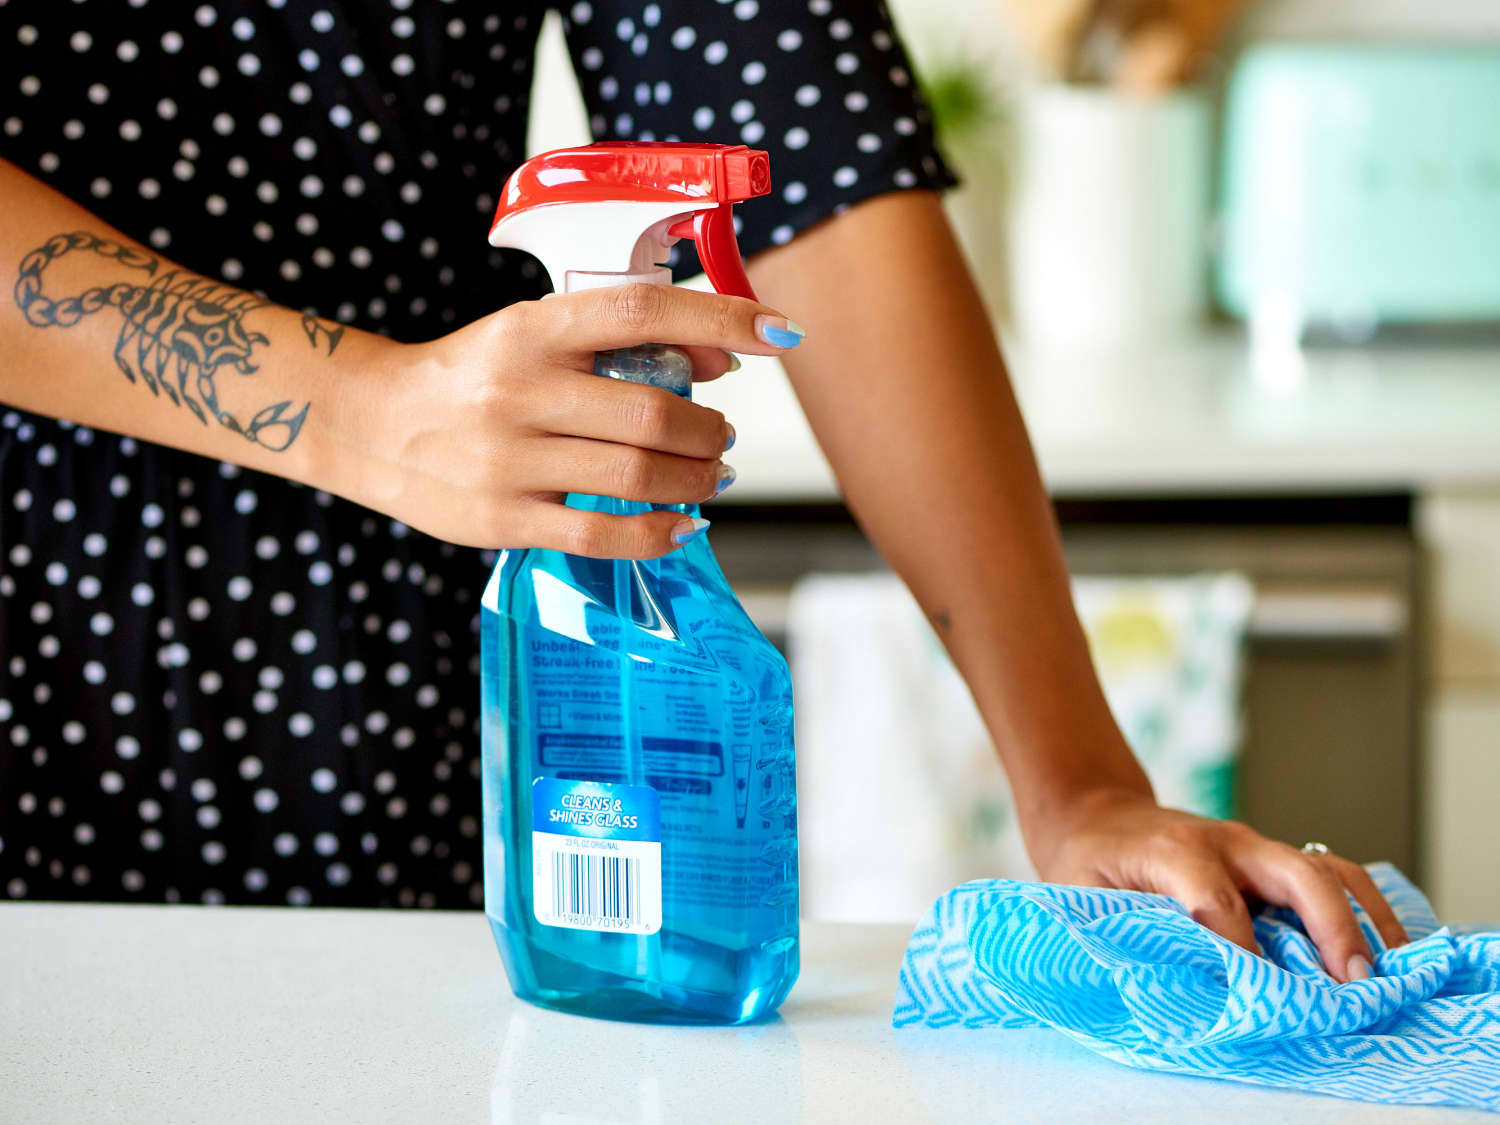 This TikTok Dollar Tree Glass Cleaner Hack Removes Car Seat Stains